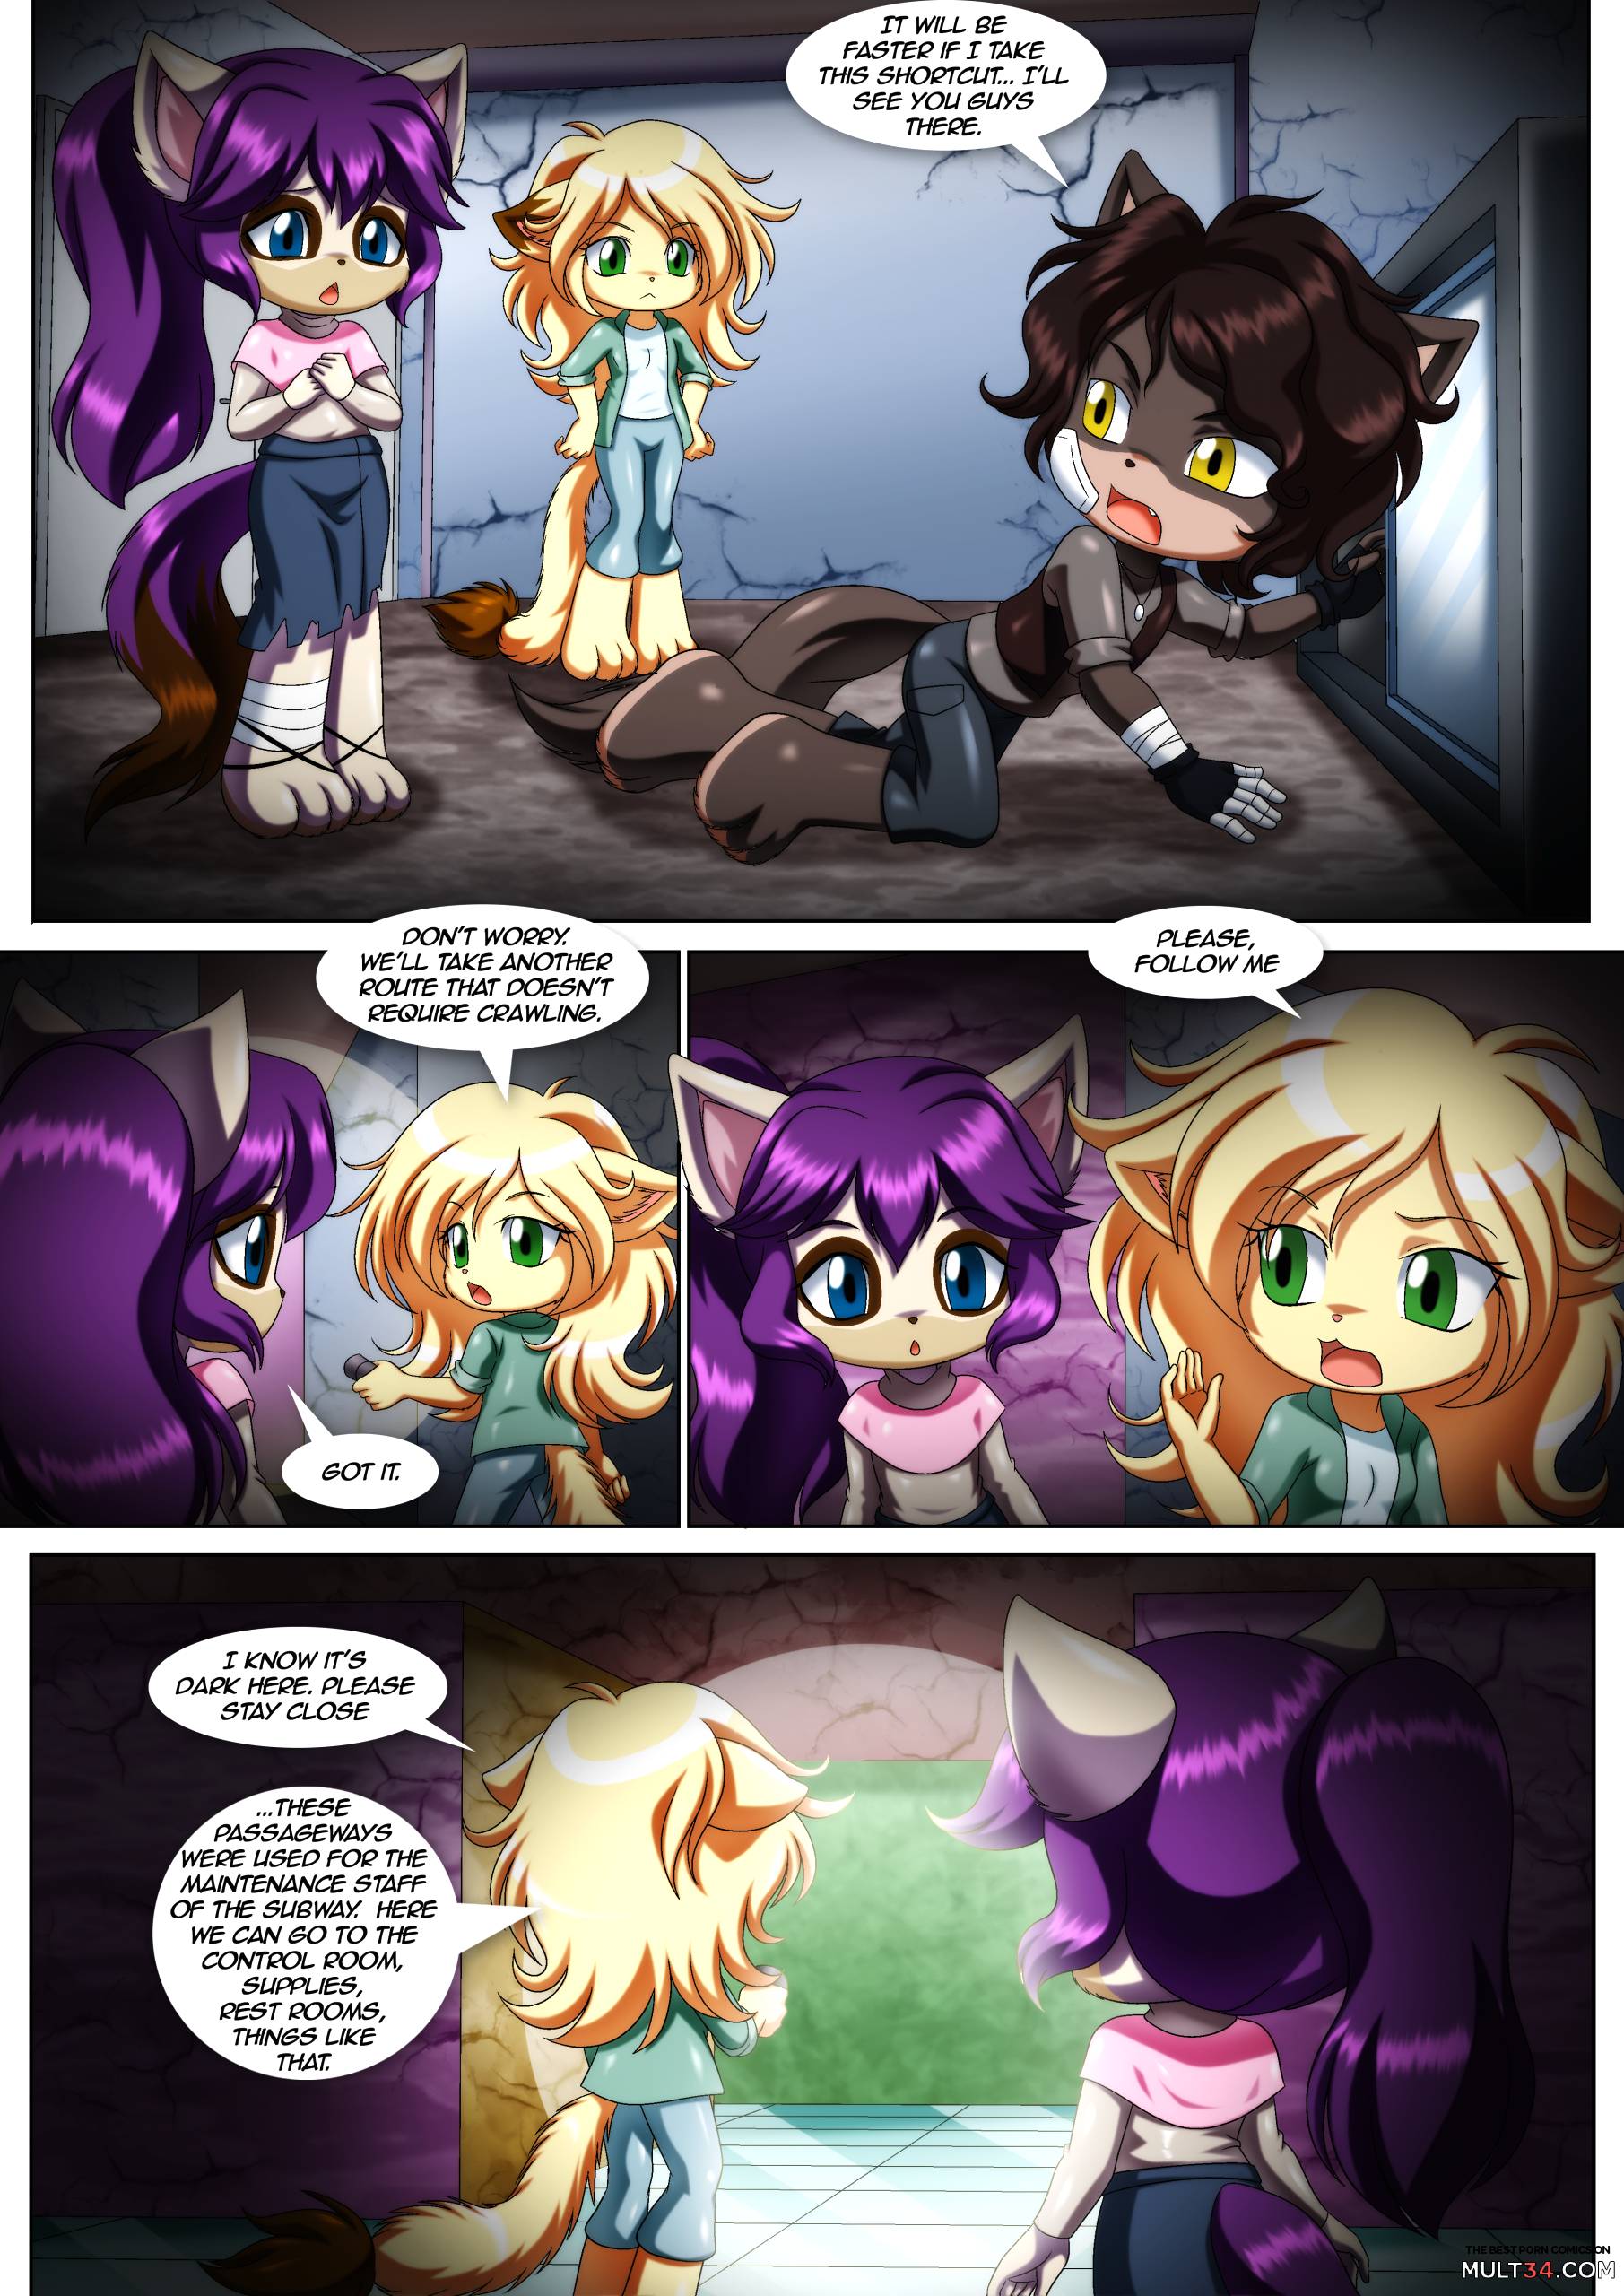 Little Tails 10: Run page 22